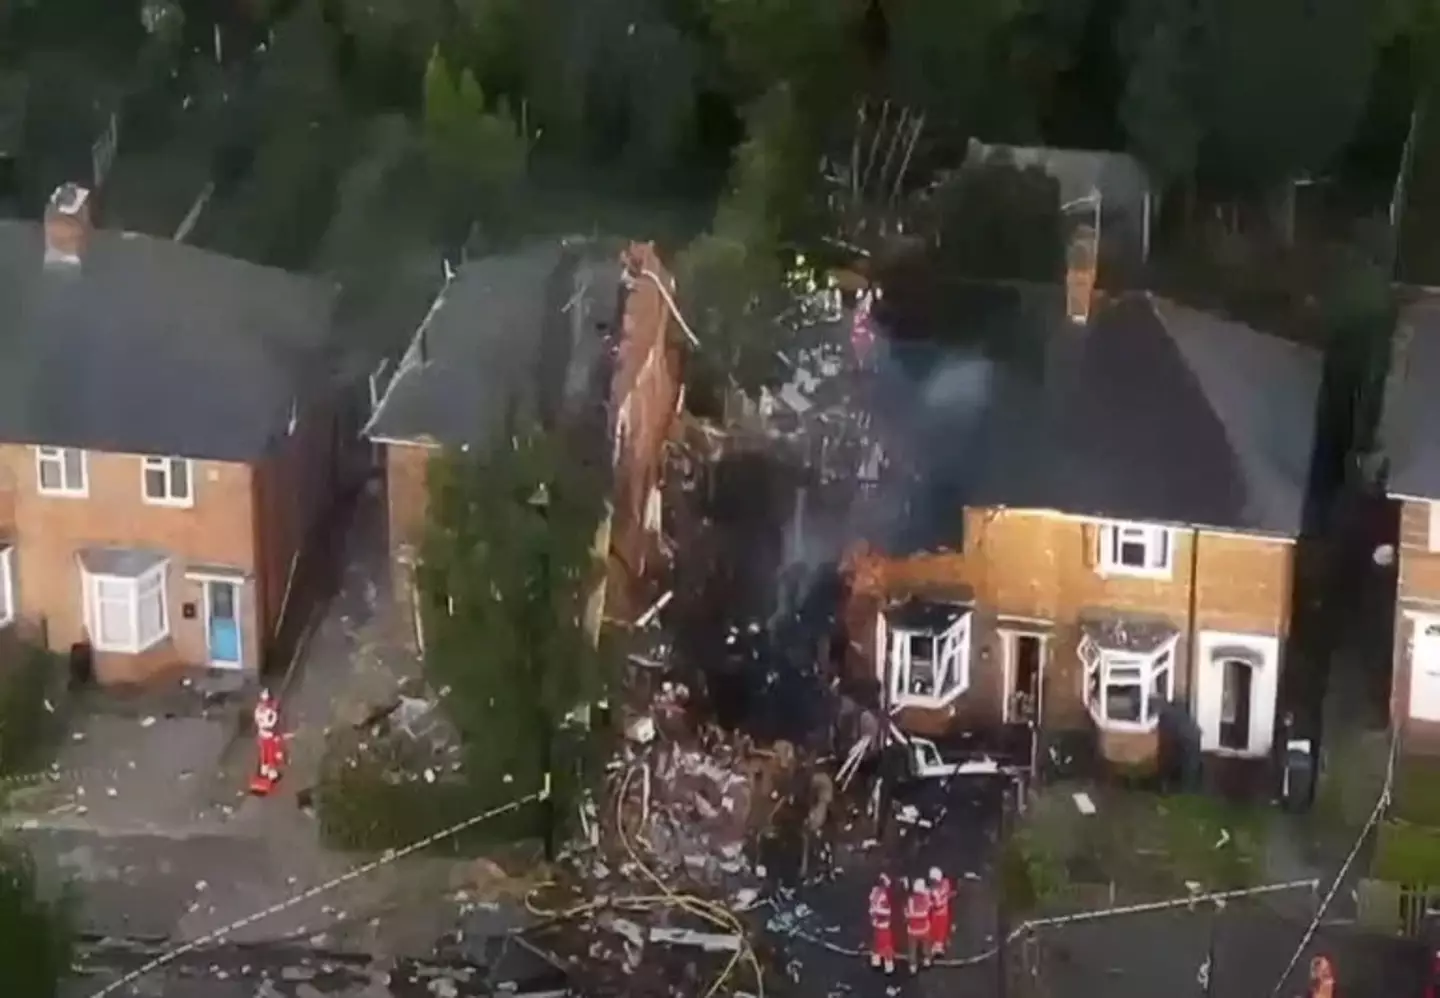 One house was completely destroyed and three others damaged in the Birmingham explosion.